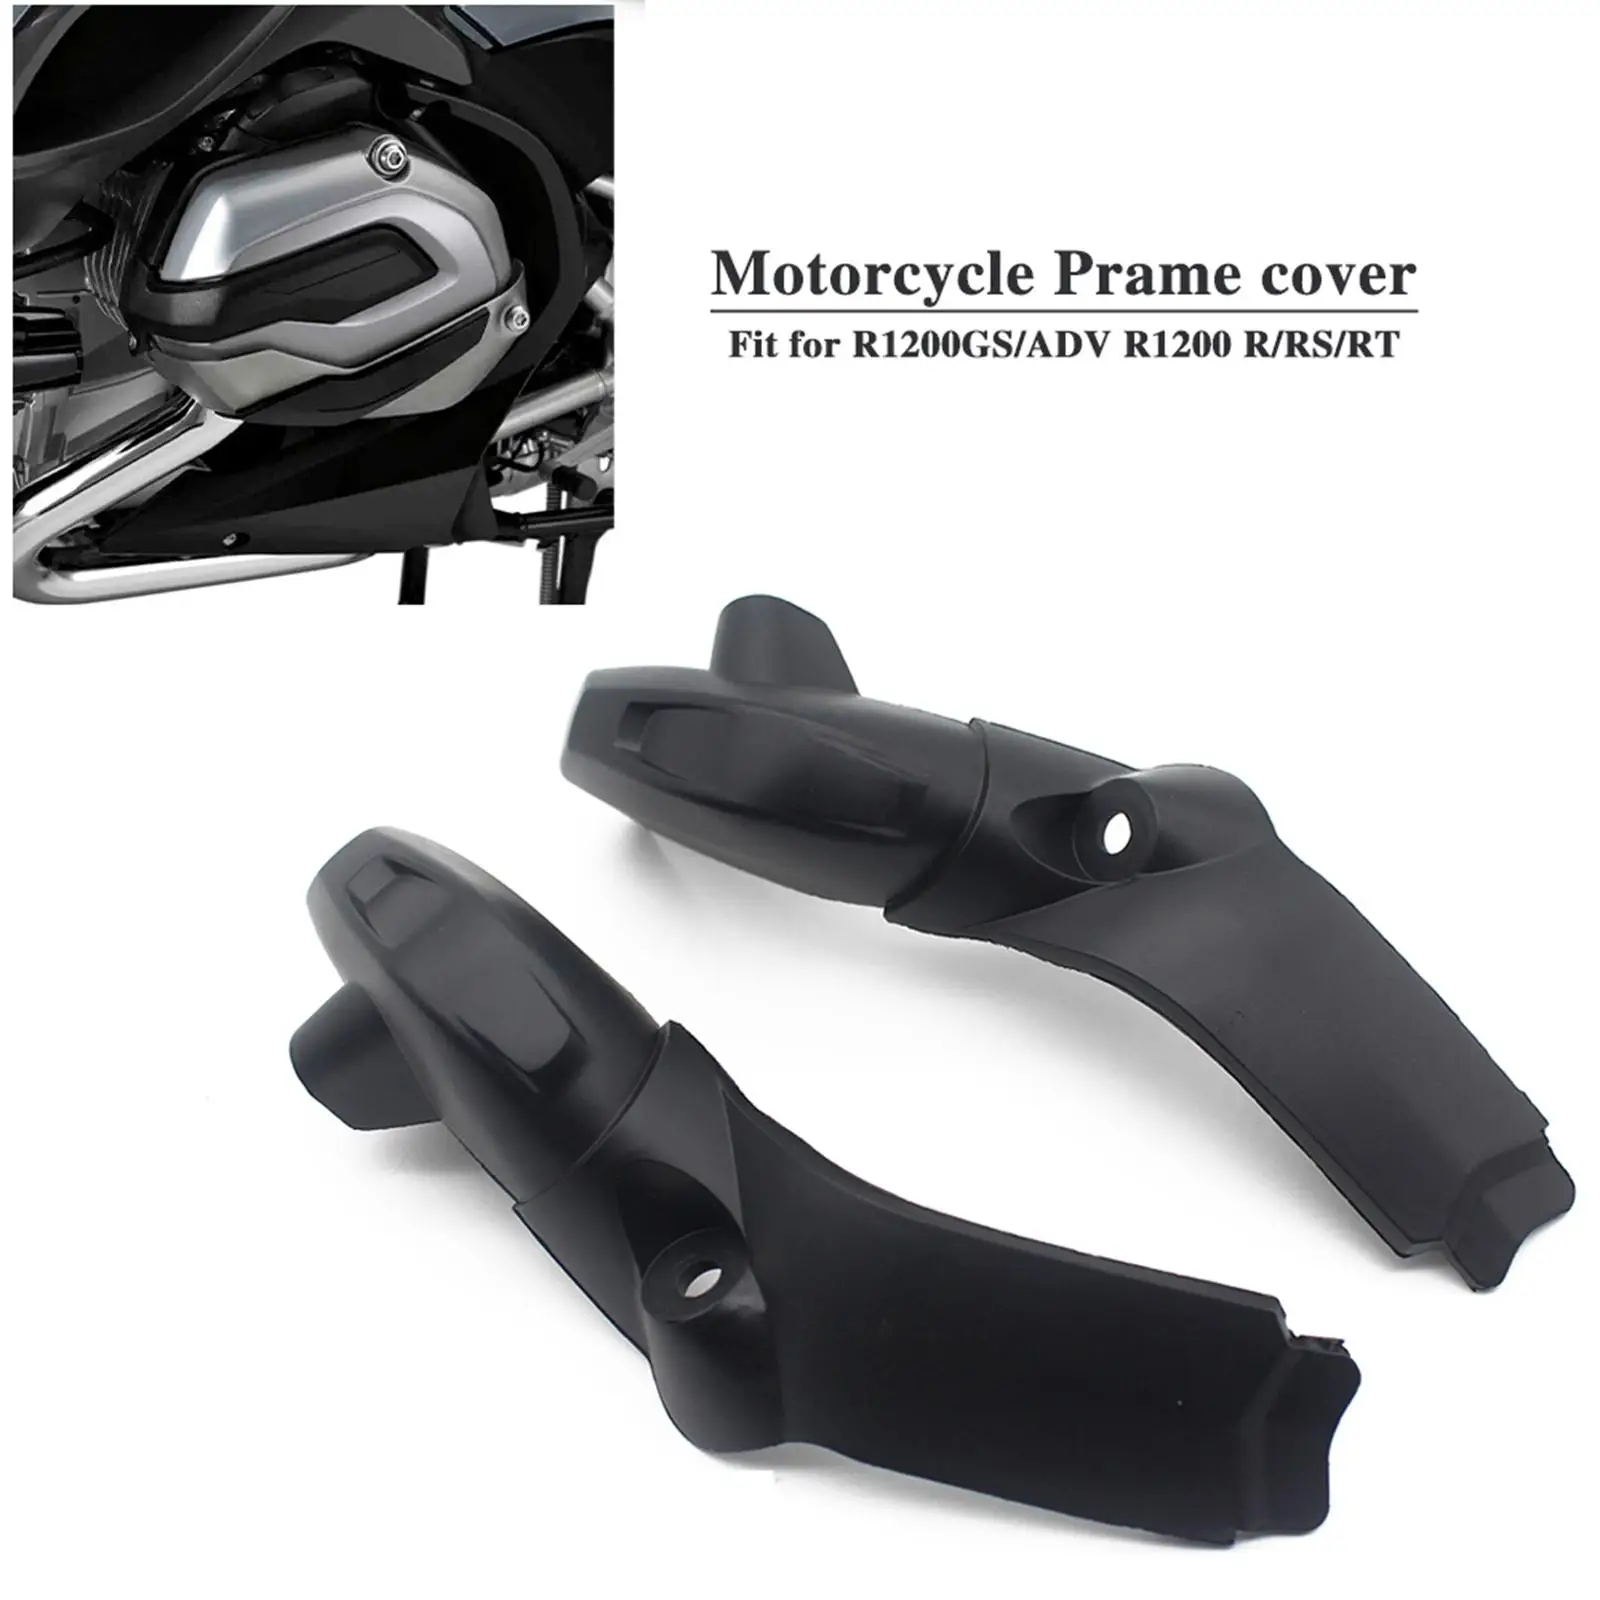 2Pcs Motorcycle Ignition Coil Spark Plug Cover Guard Fit for R1200GS GS Adv